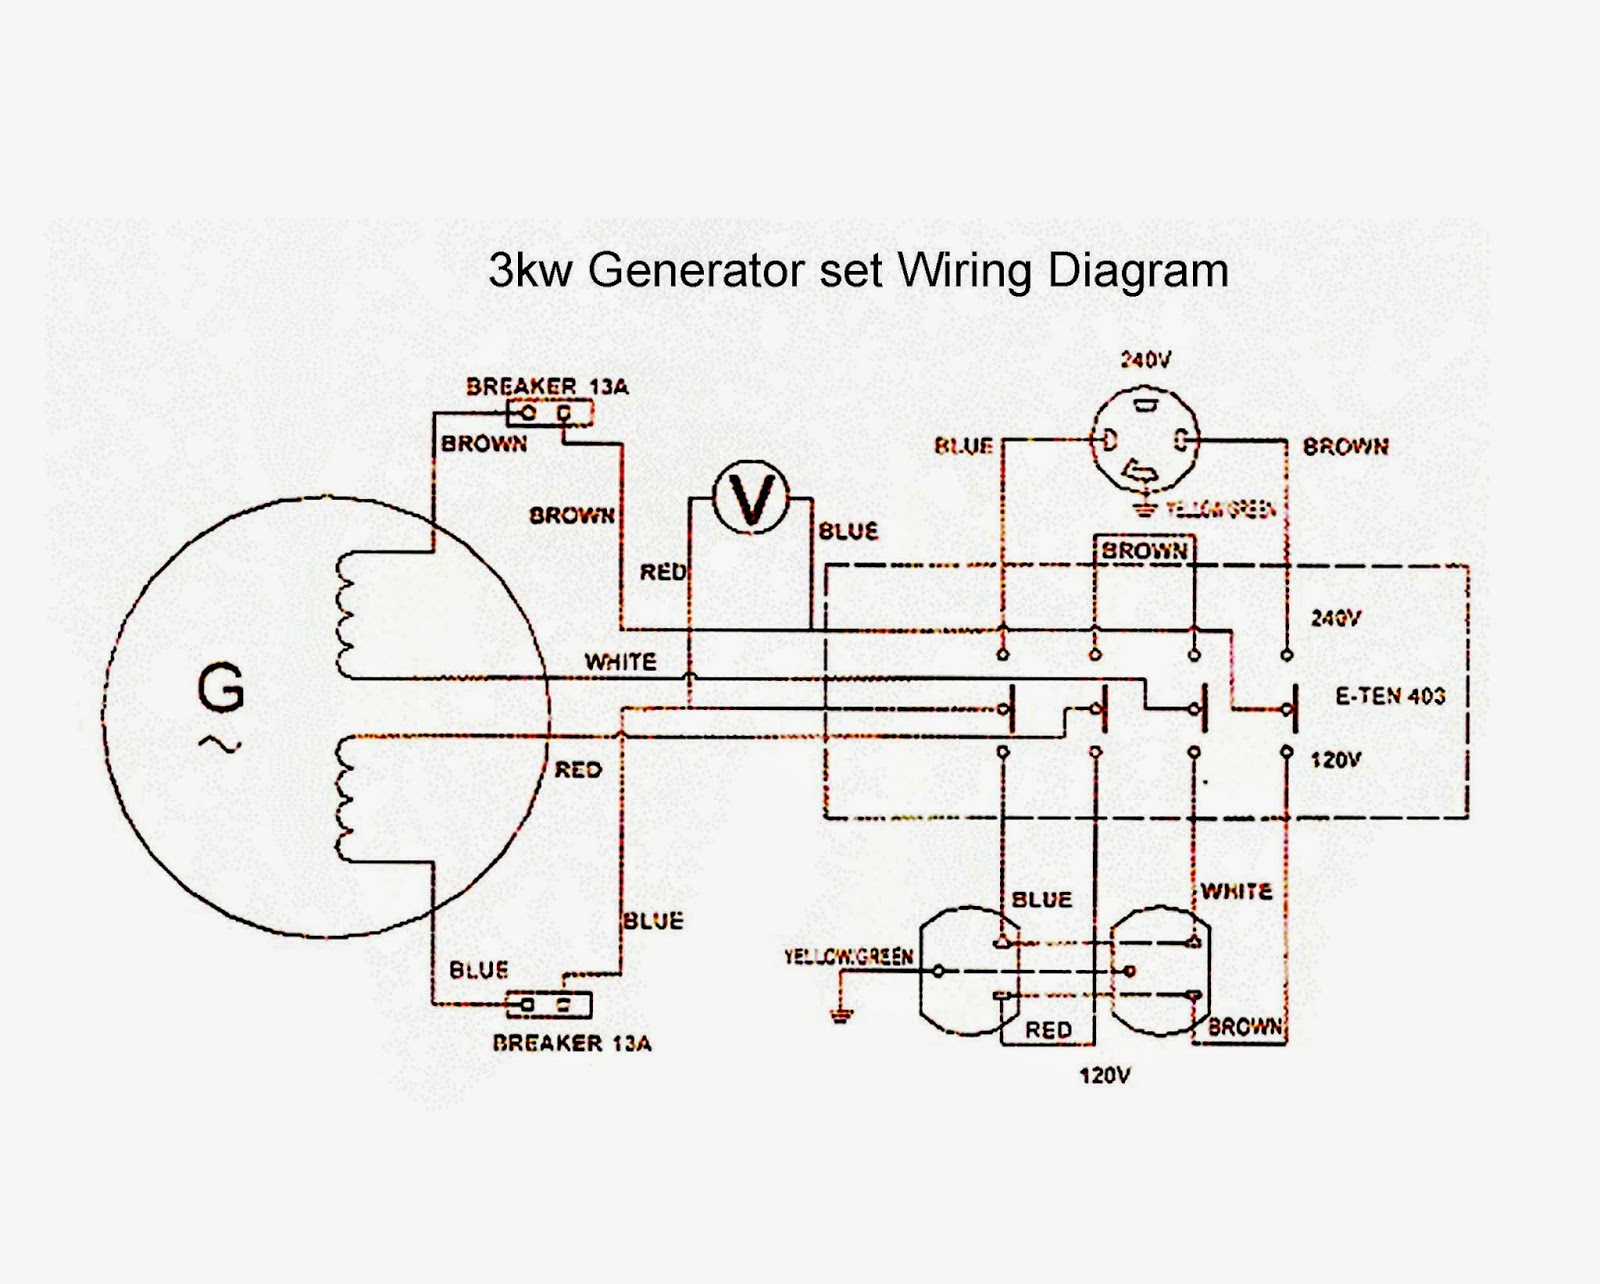 July 2014 | Electrical Winding - wiring Diagrams